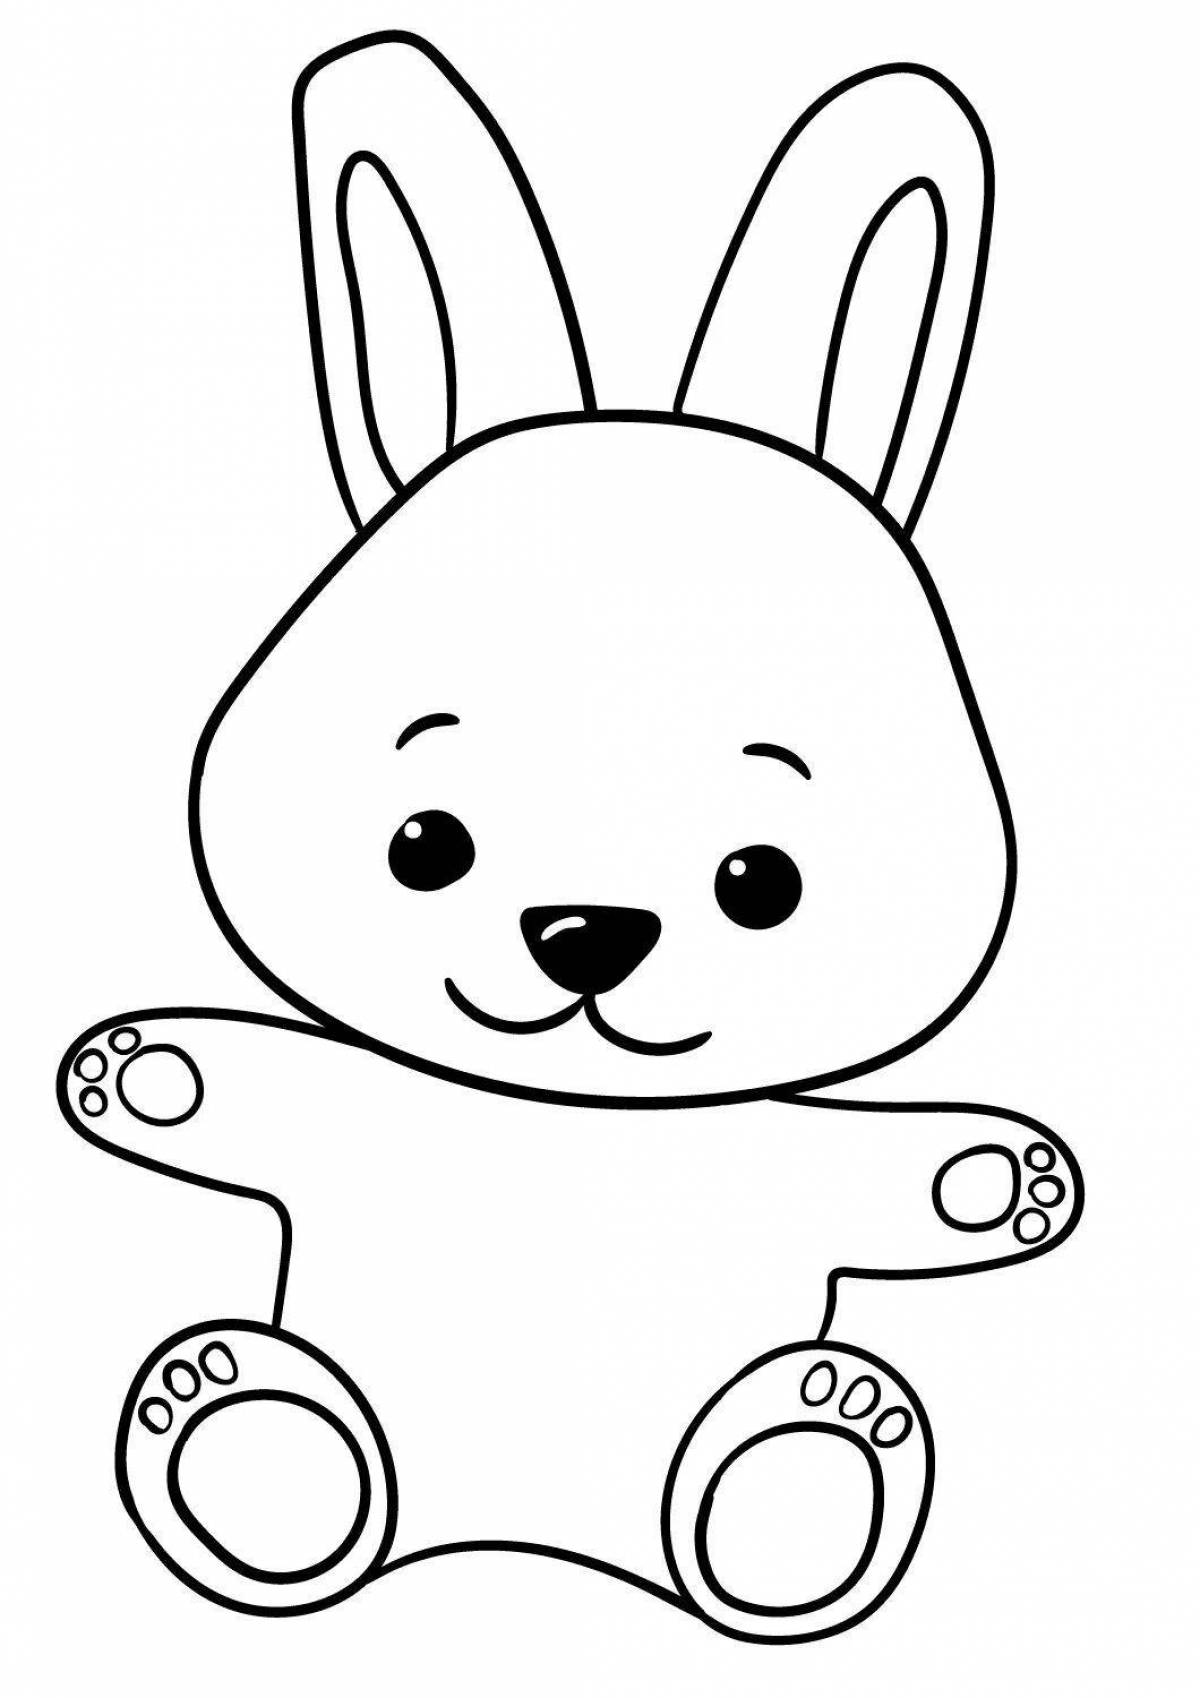 Coloring book playful bear and hare